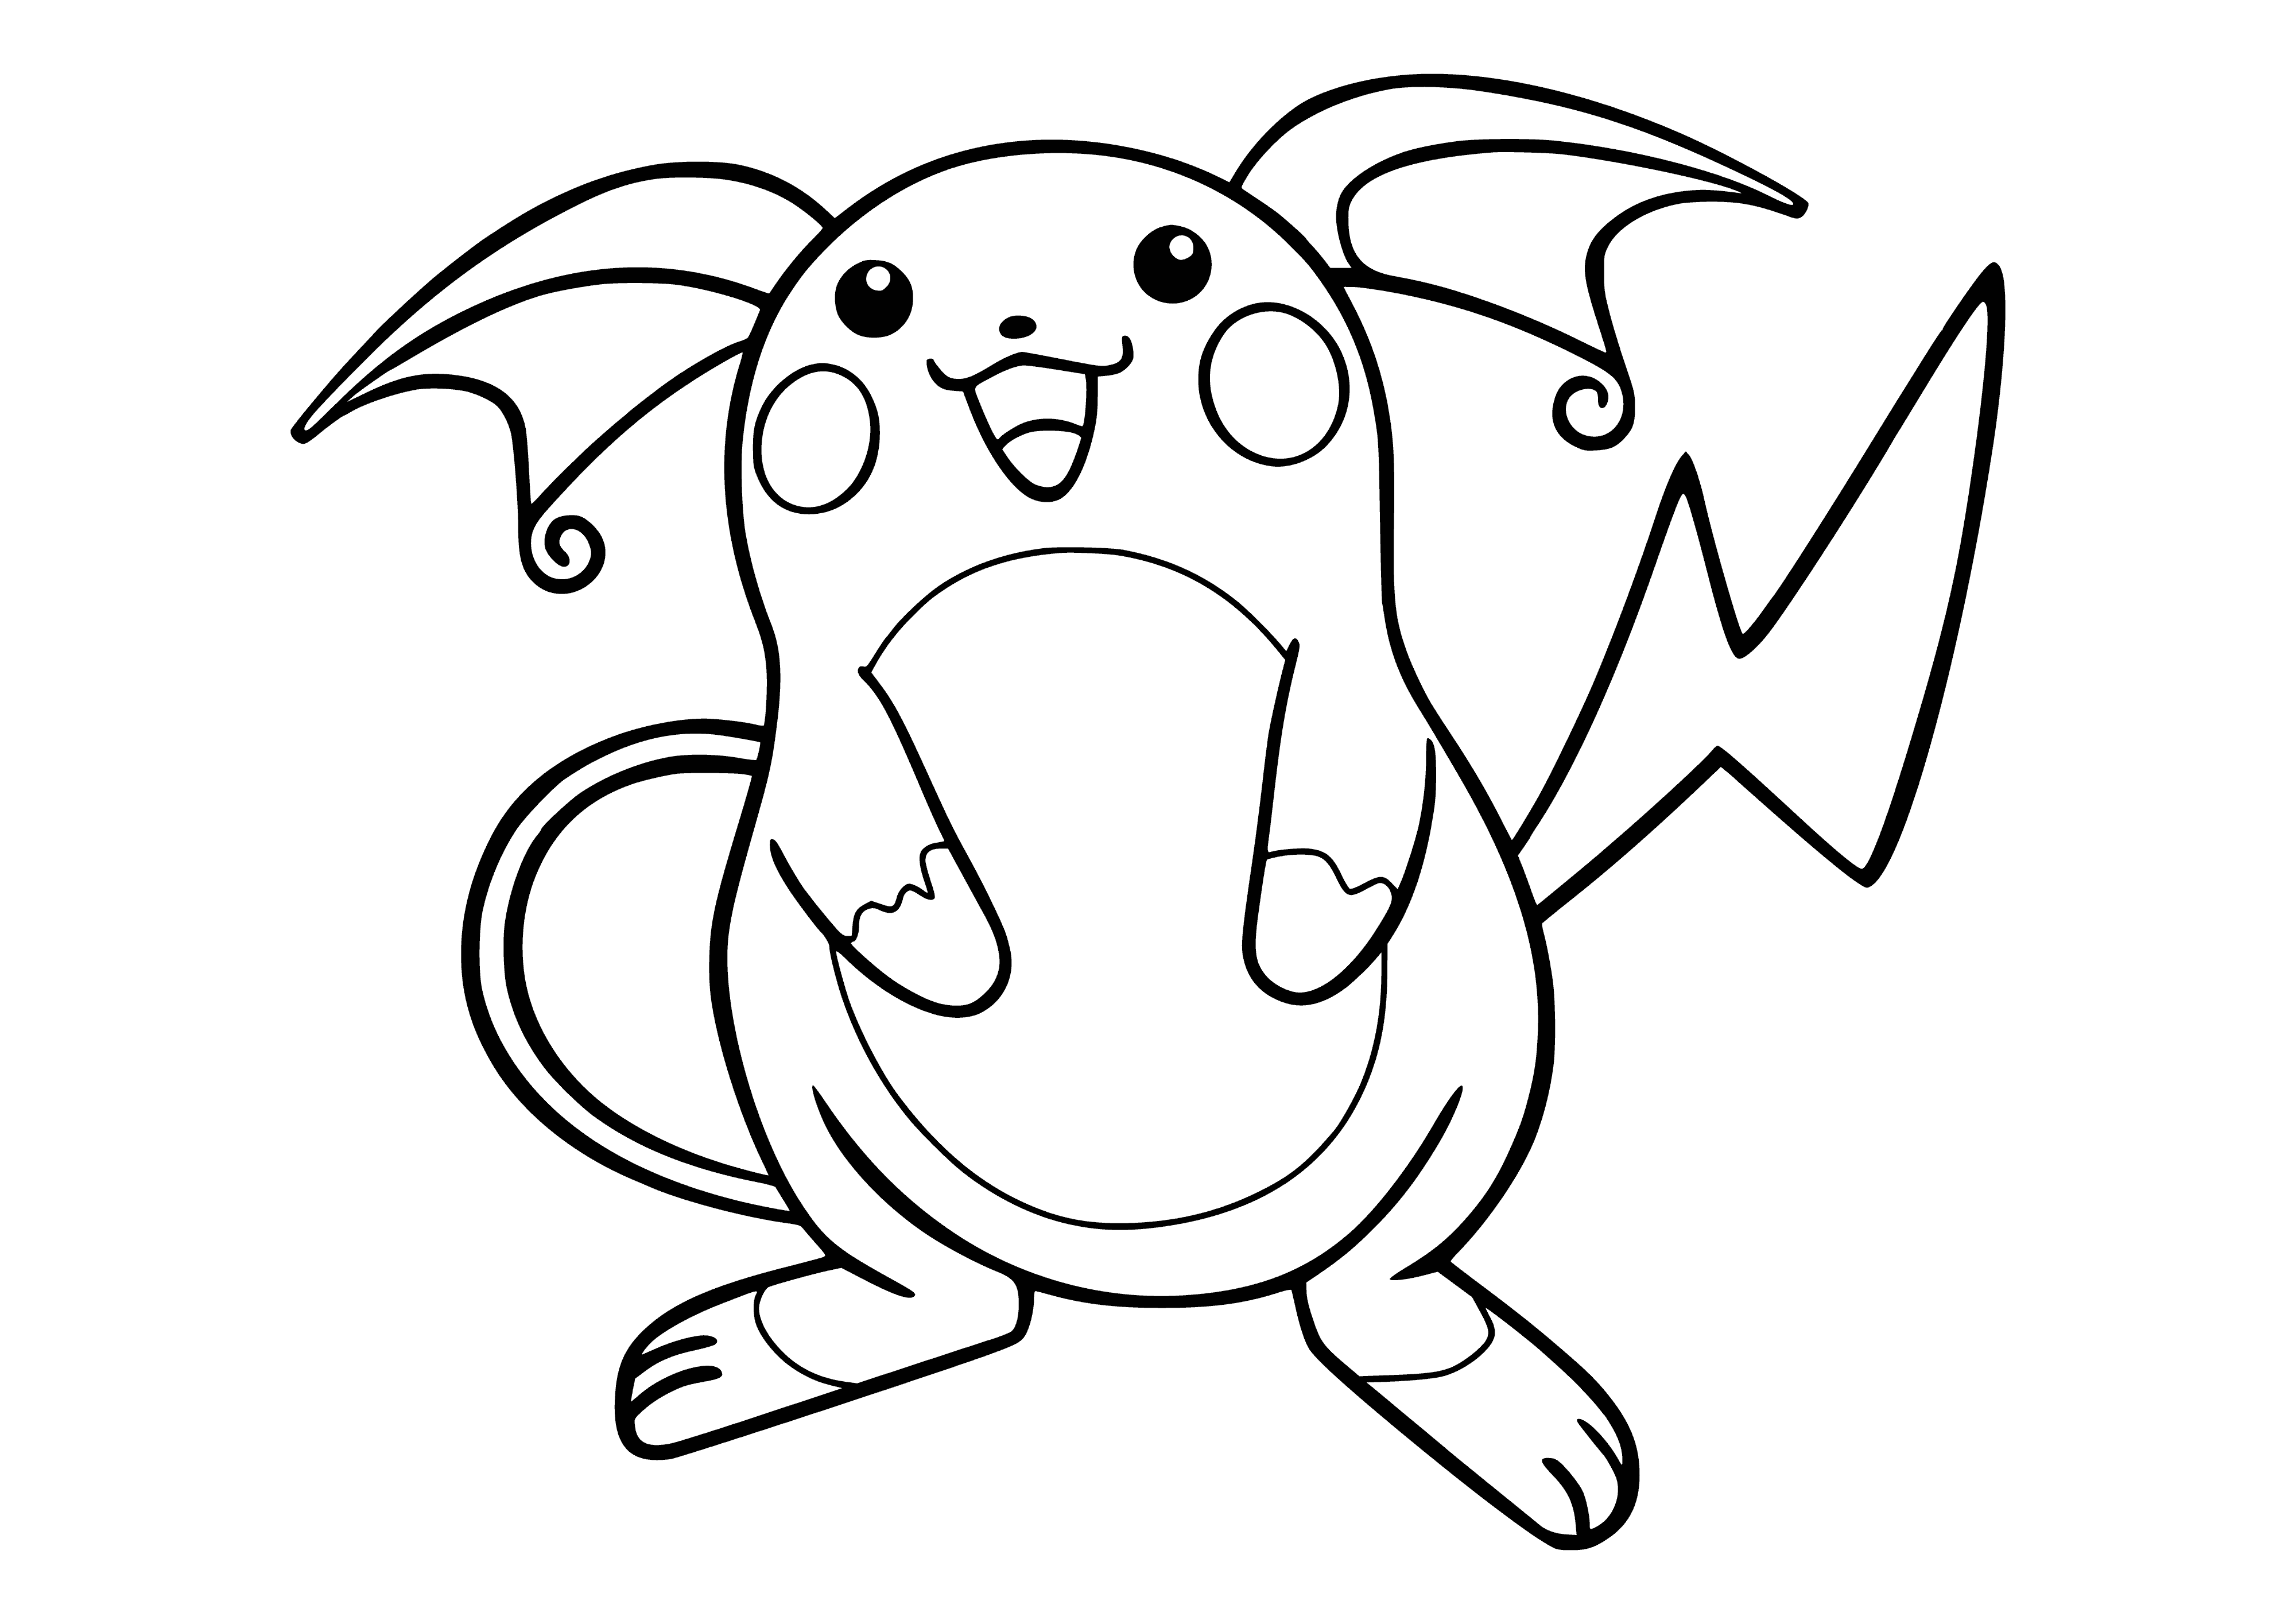 coloring page: Raichu: Brown fur w/ yellow stripes, long ears & tail, large round eyes, red cheeks, black paws. Generates electricity.